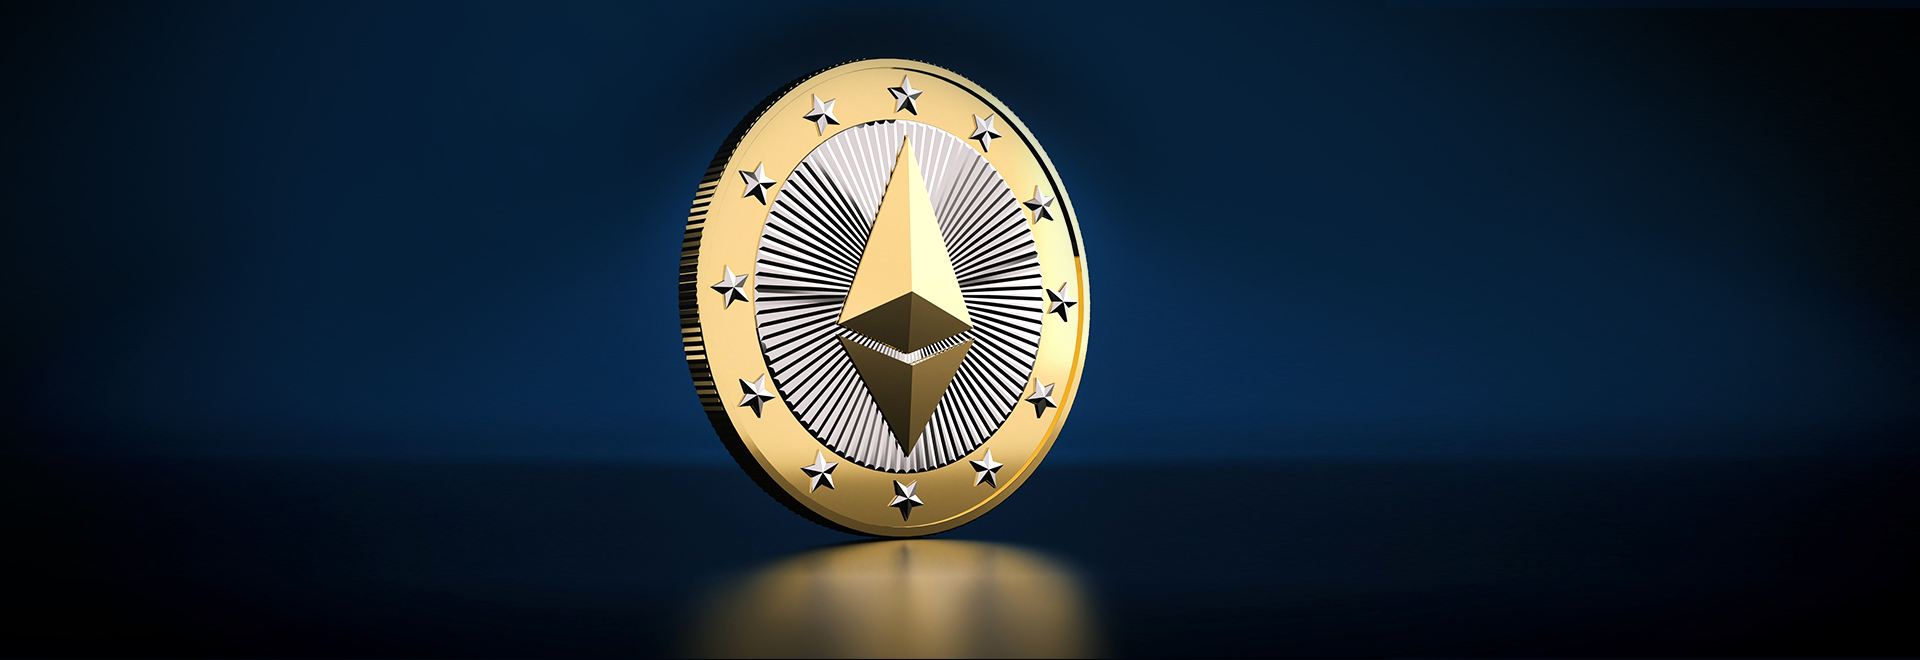 Ethereum's Future Remains Shrouded In Uncertainty